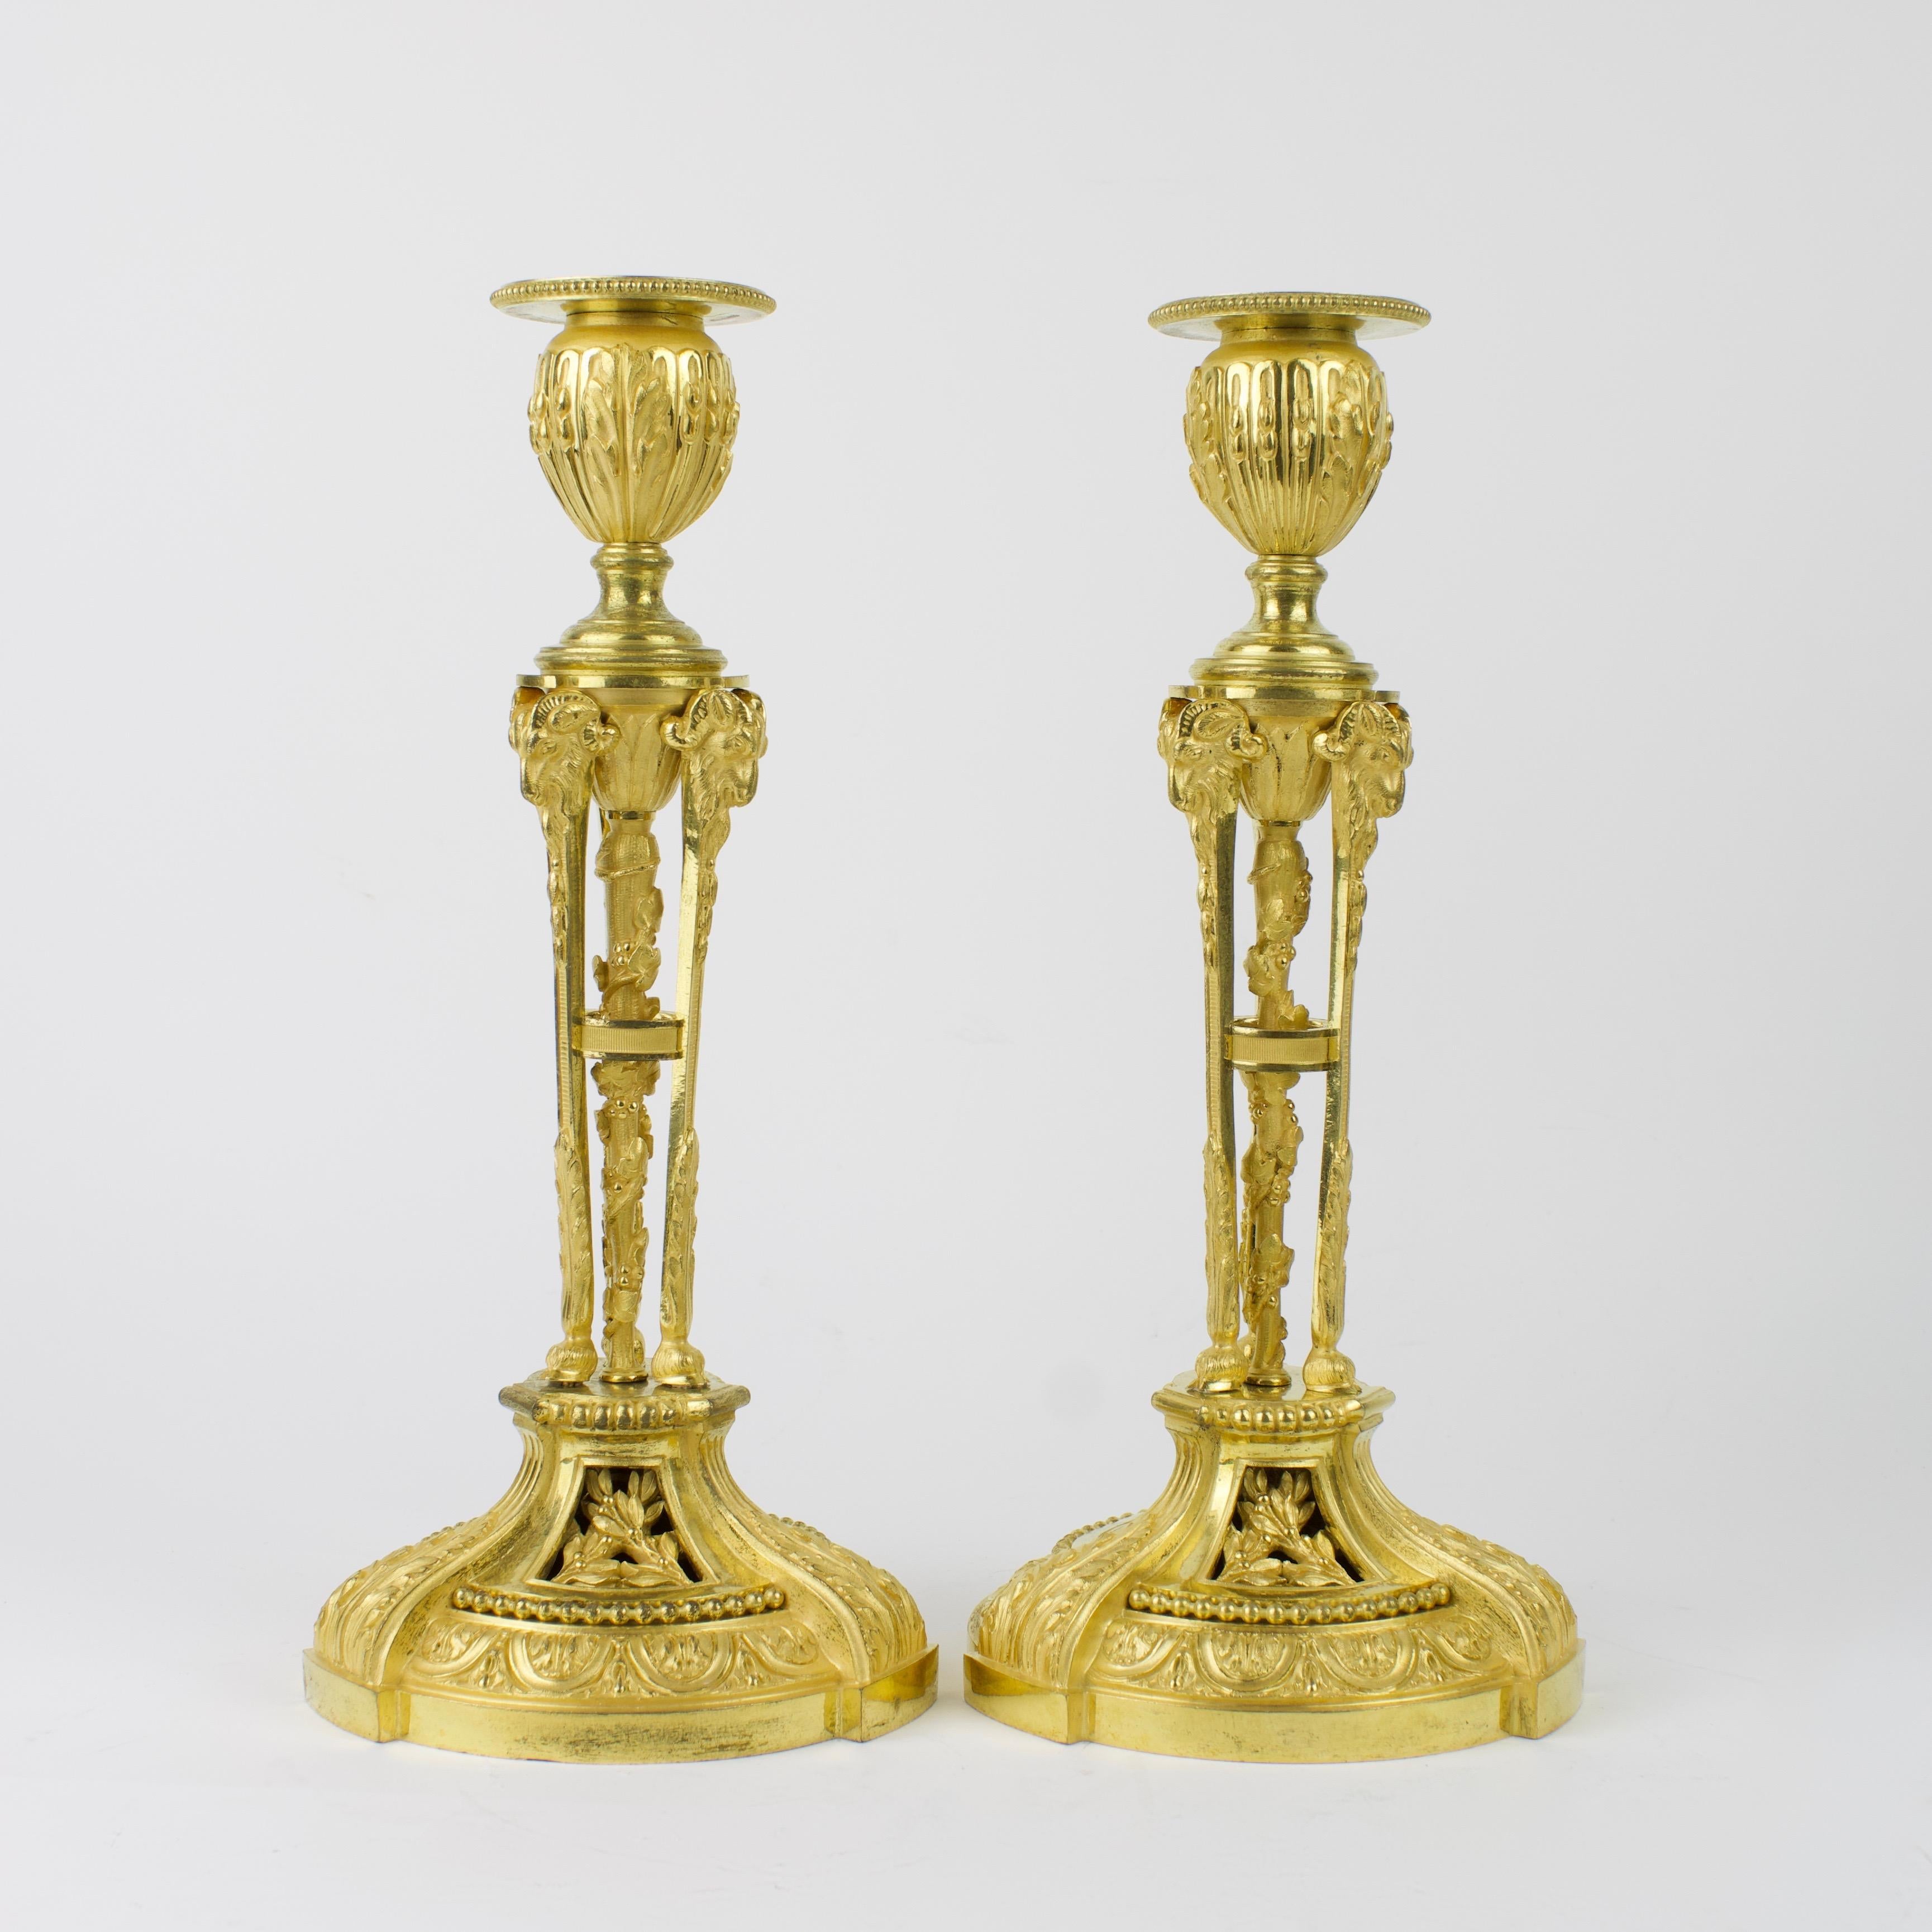 Pair of Early 19th Century Louis XVI Gilt Bronze Candlesticks after Martincourt In Good Condition For Sale In Berlin, DE